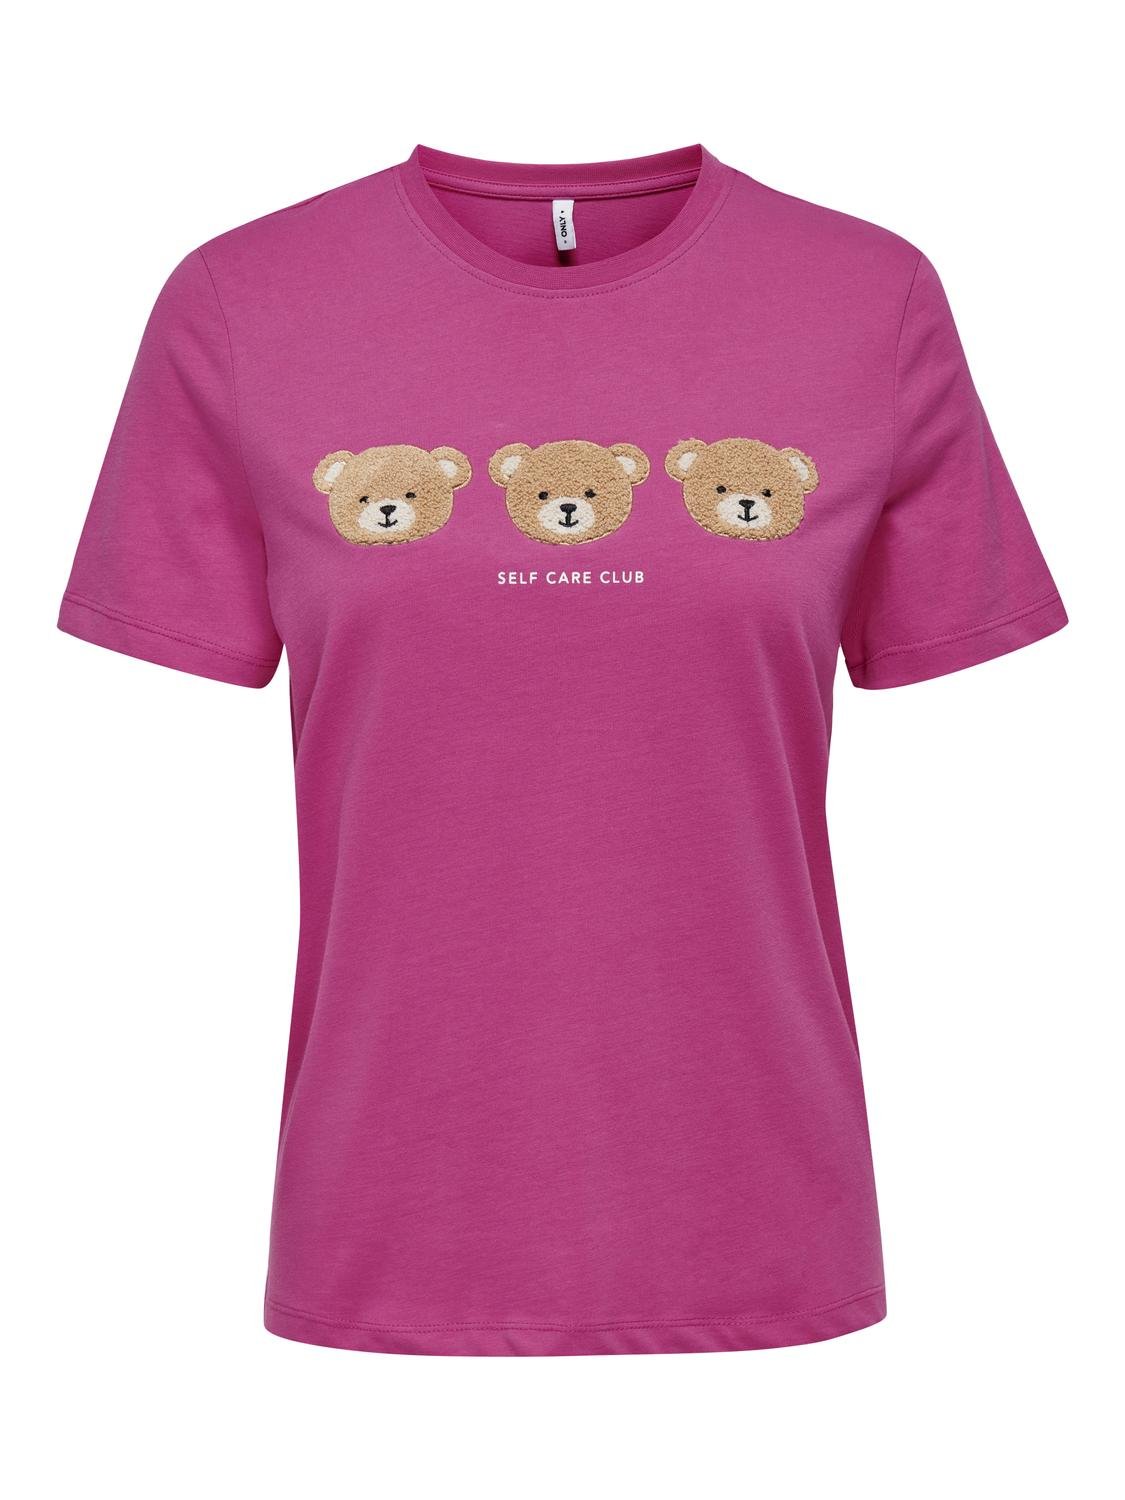 Only - Flocked Teddy Club Pink Tee